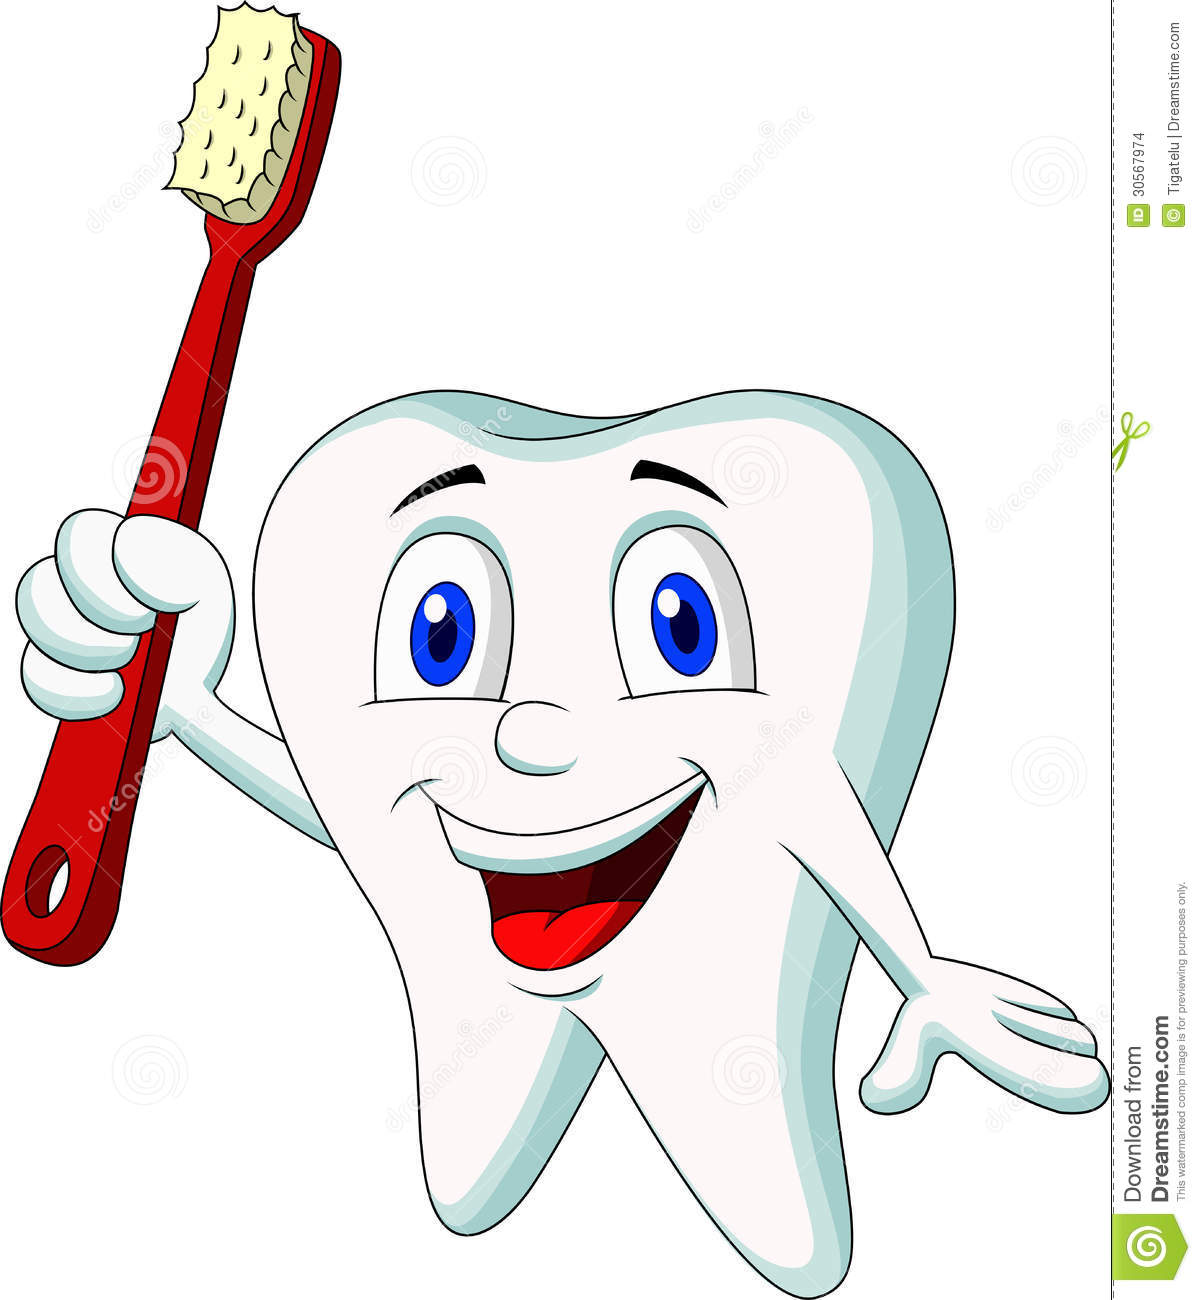 Cute Tooth Cartoon Holding Tooth Brush Stock Images   Image  30567974